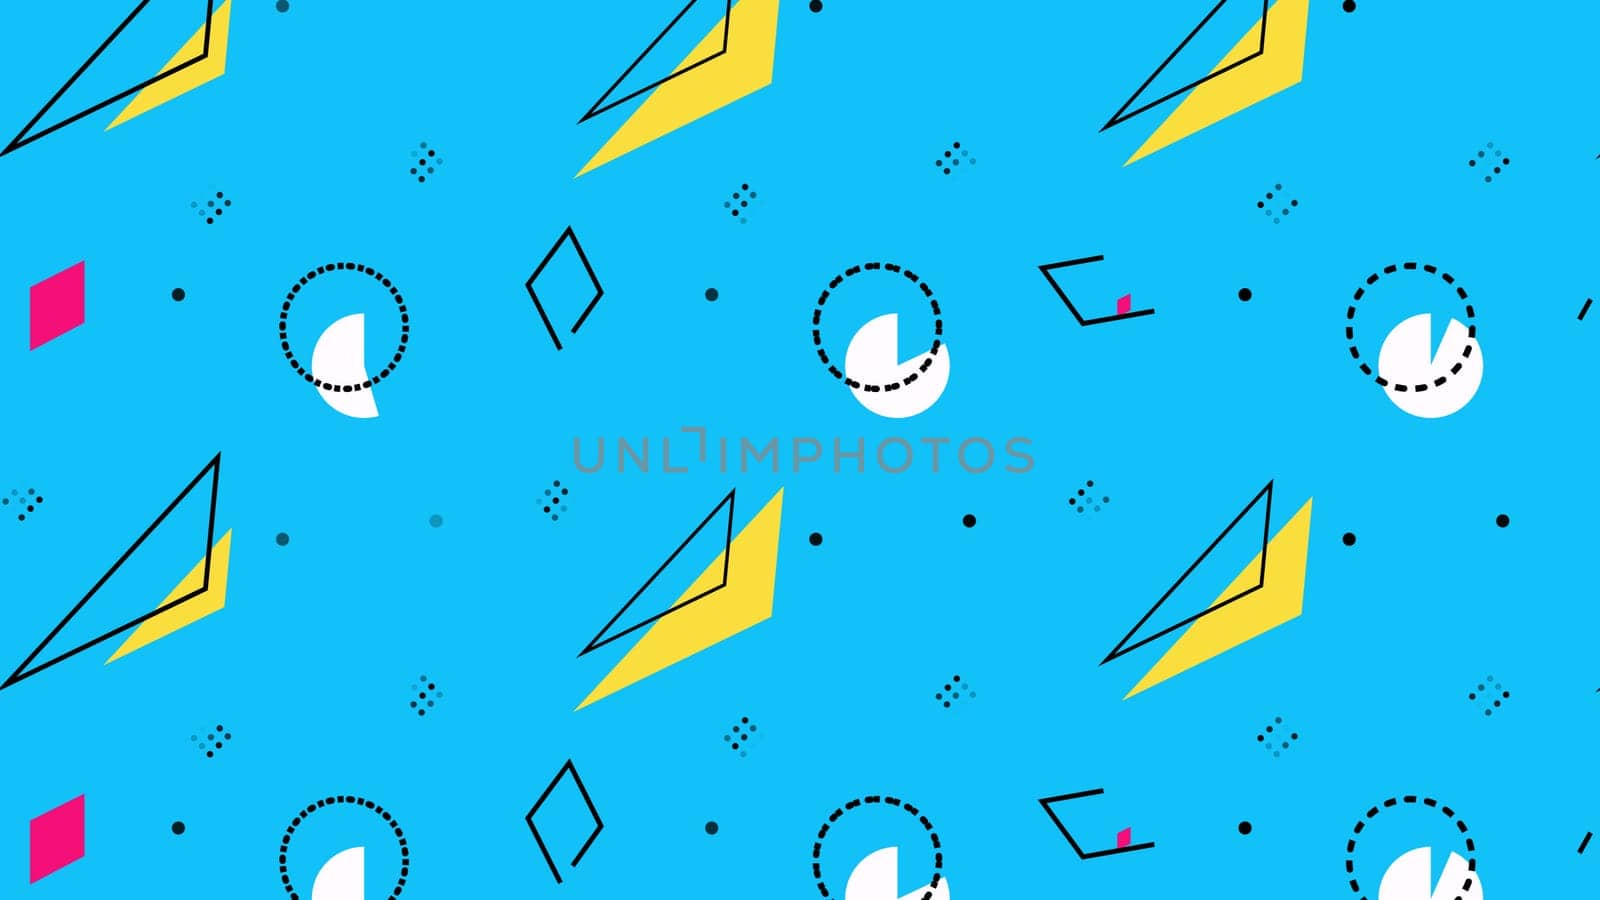 Geometric retro background pop art style with yellow triange shapes on blue composition.